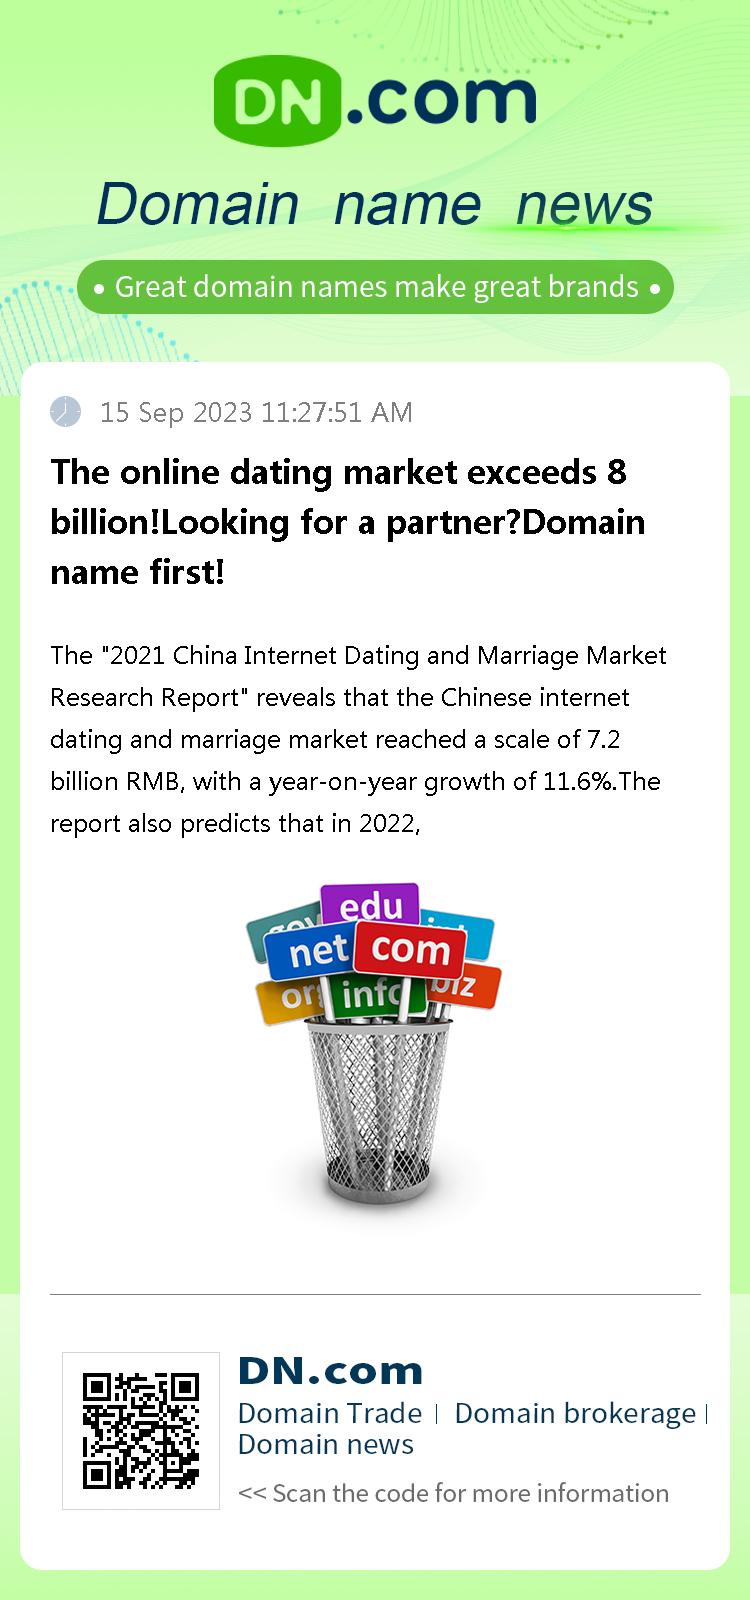 The online dating market exceeds 8 billion!Looking for a partner?Domain name first!